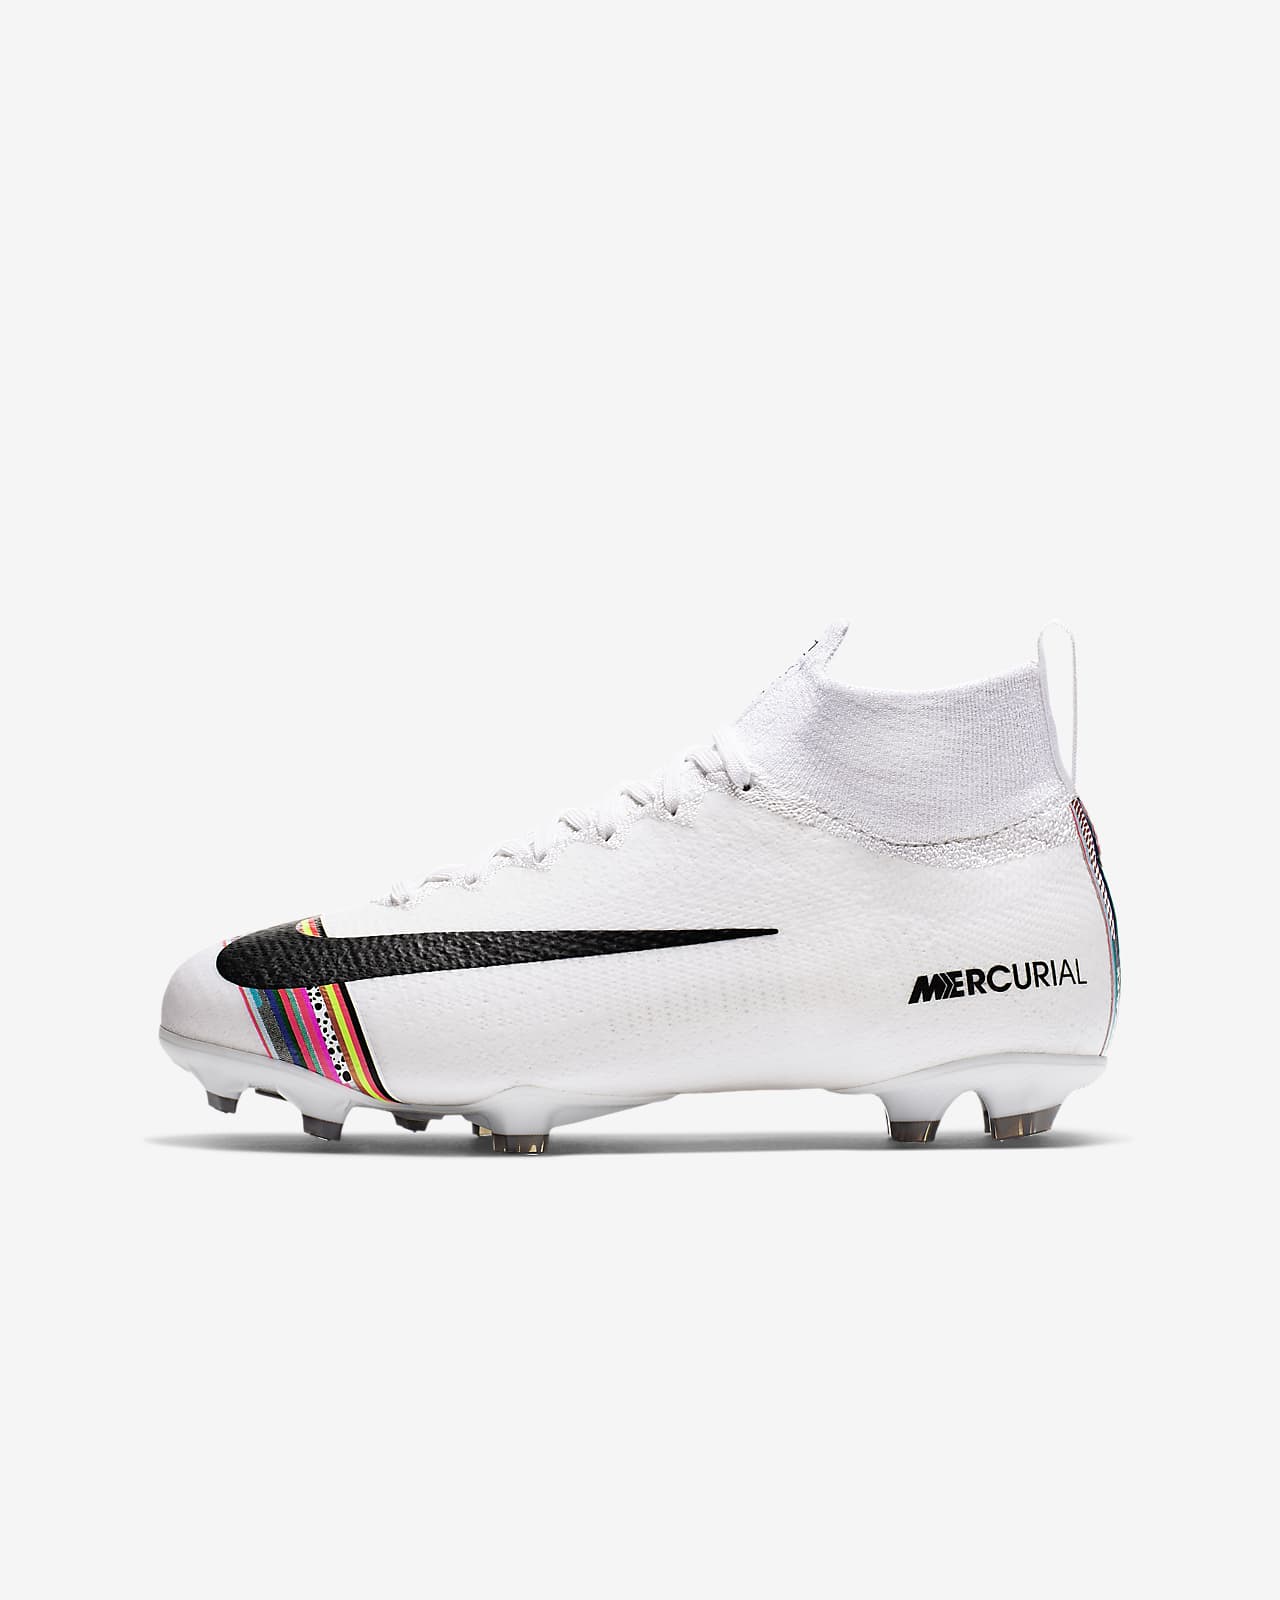 nike mercurial superfly 6 level up